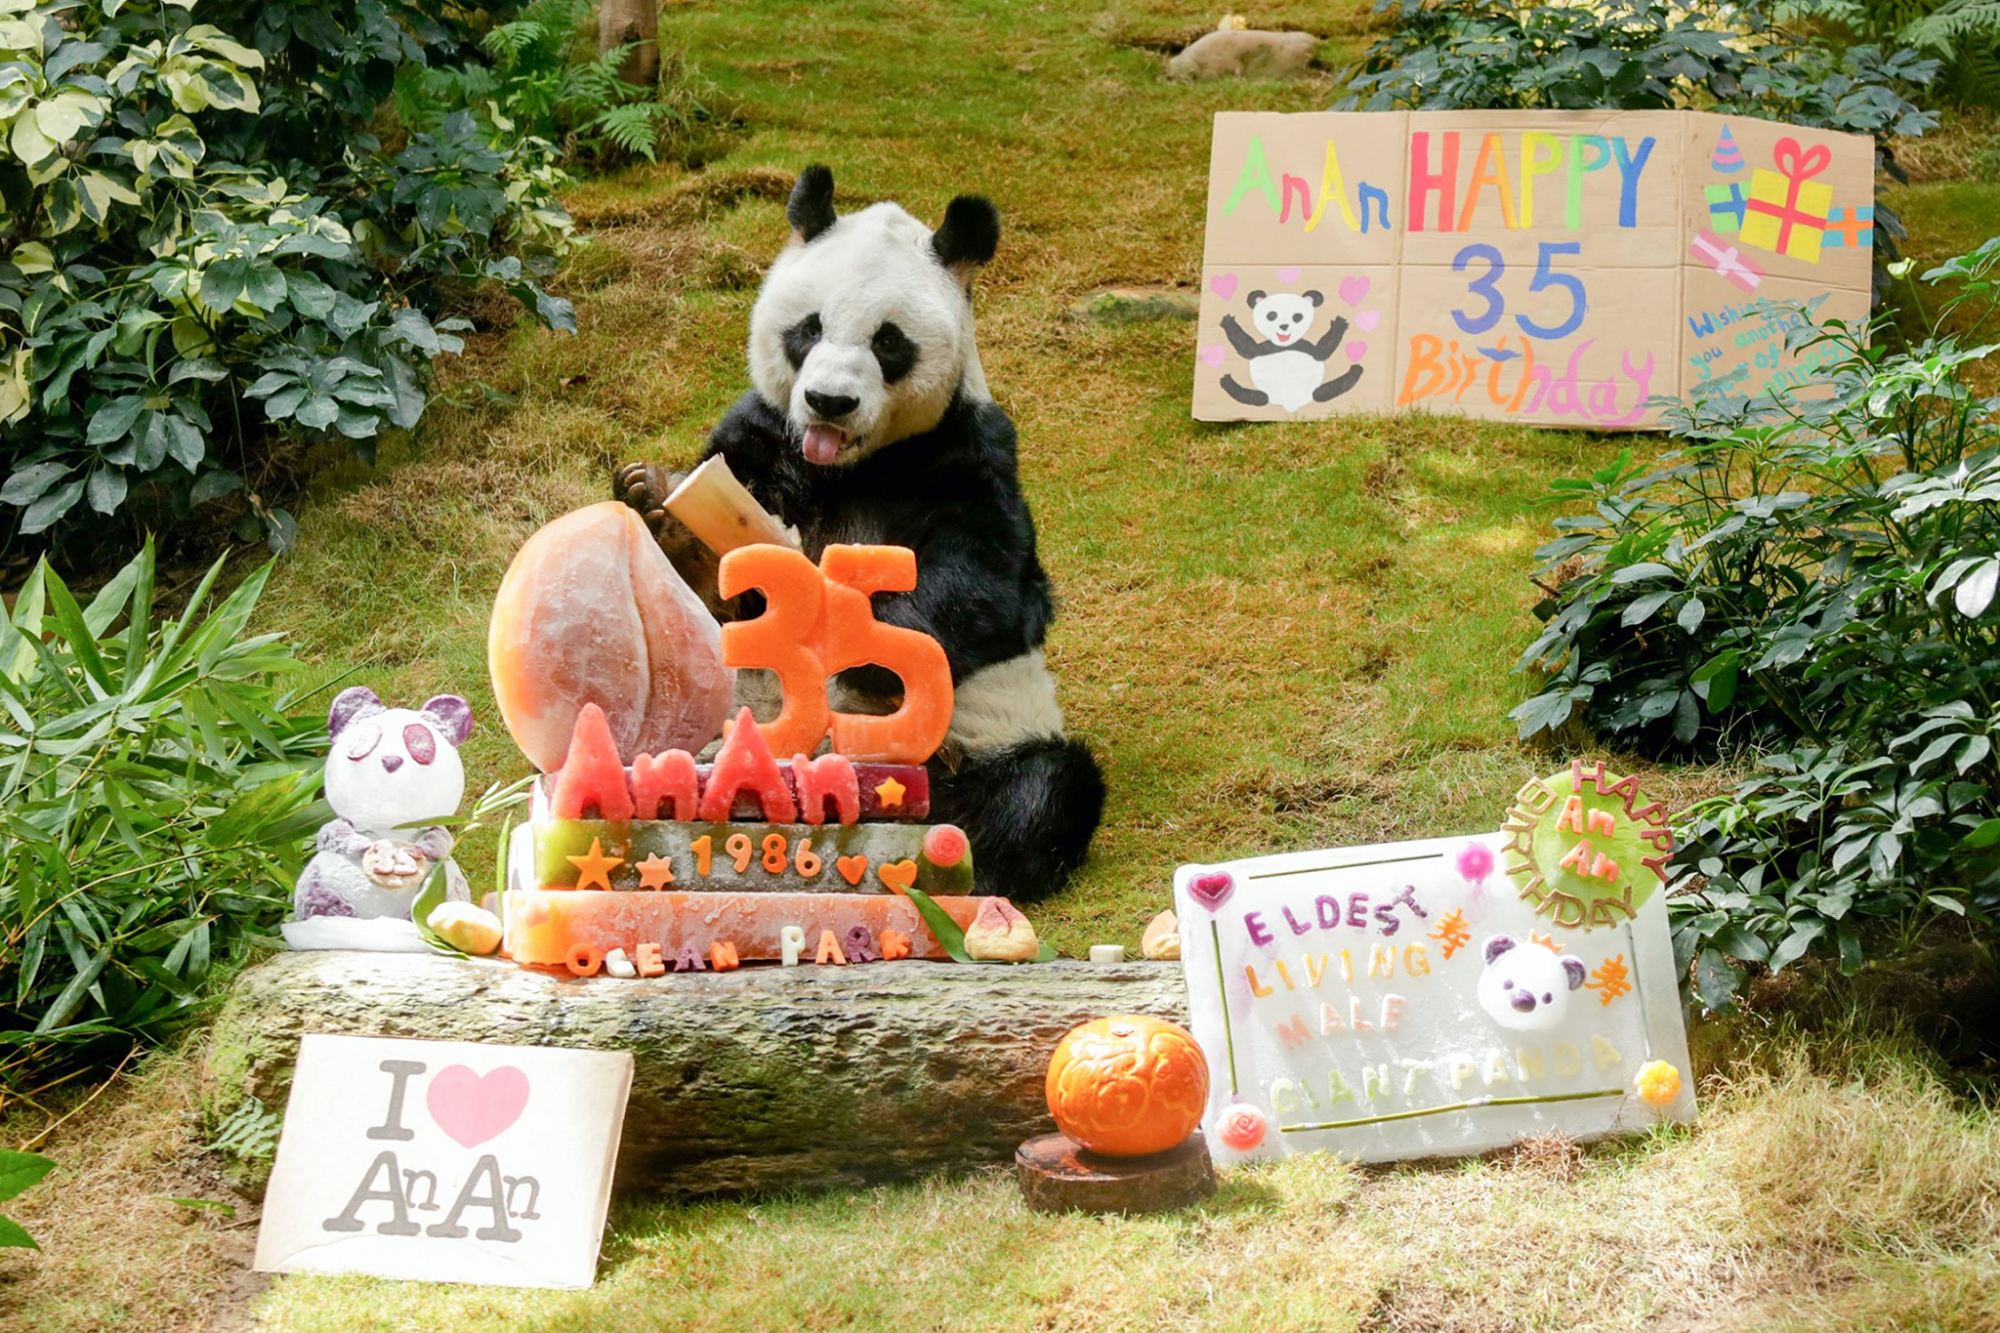 A celebration thrown for An An’s 35th birthday in August last year. Photo: Handout